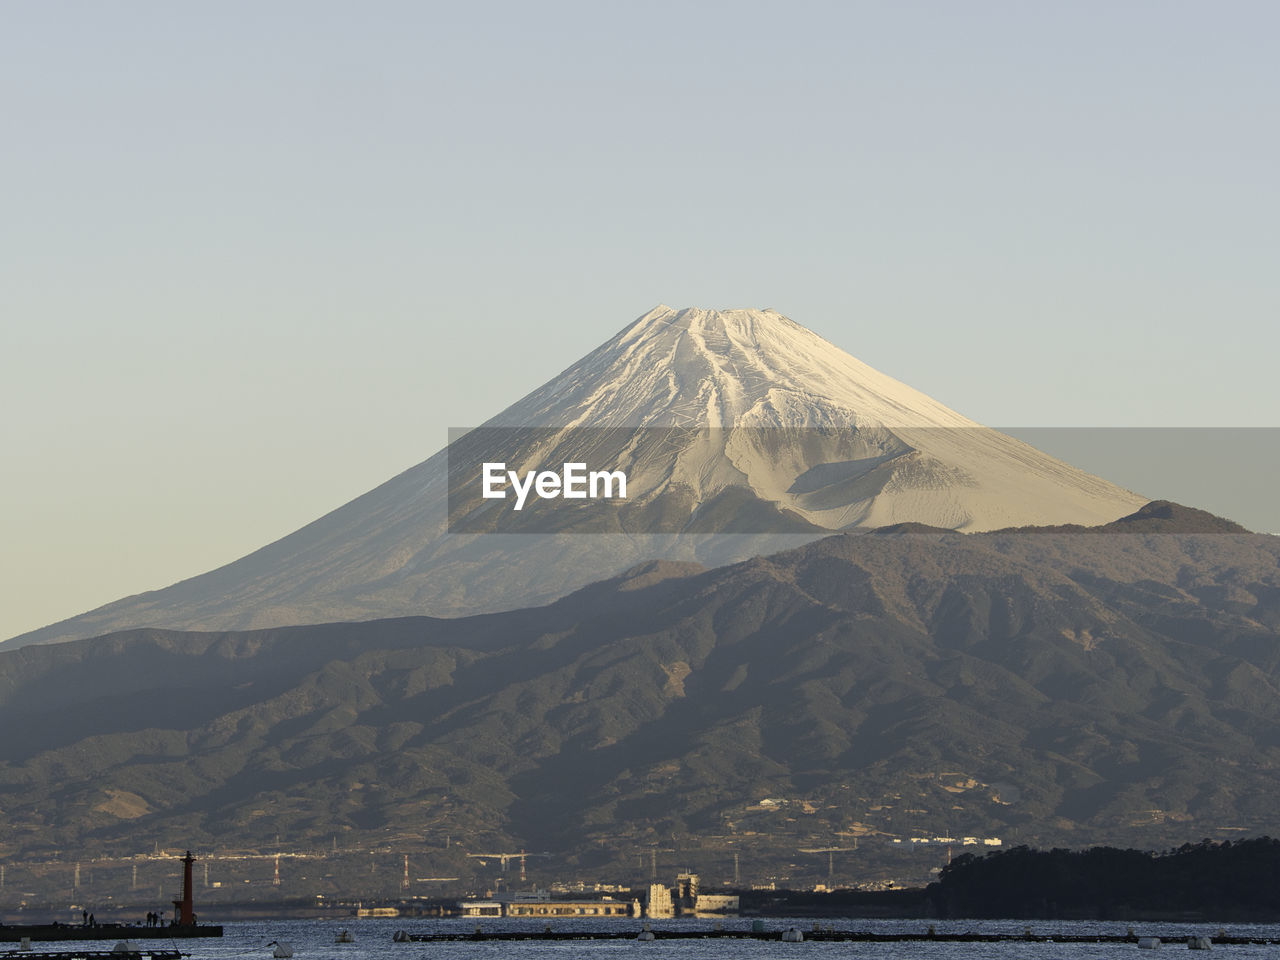 mountain, volcano, stratovolcano, water, sky, beauty in nature, scenics - nature, nature, travel destinations, no people, land, horizon, landscape, snow, travel, cinder cone, environment, sea, outdoors, day, non-urban scene, snowcapped mountain, volcanic landscape, tranquility, tourism, geology, cold temperature, tranquil scene, winter, clear sky, transportation, mountain peak